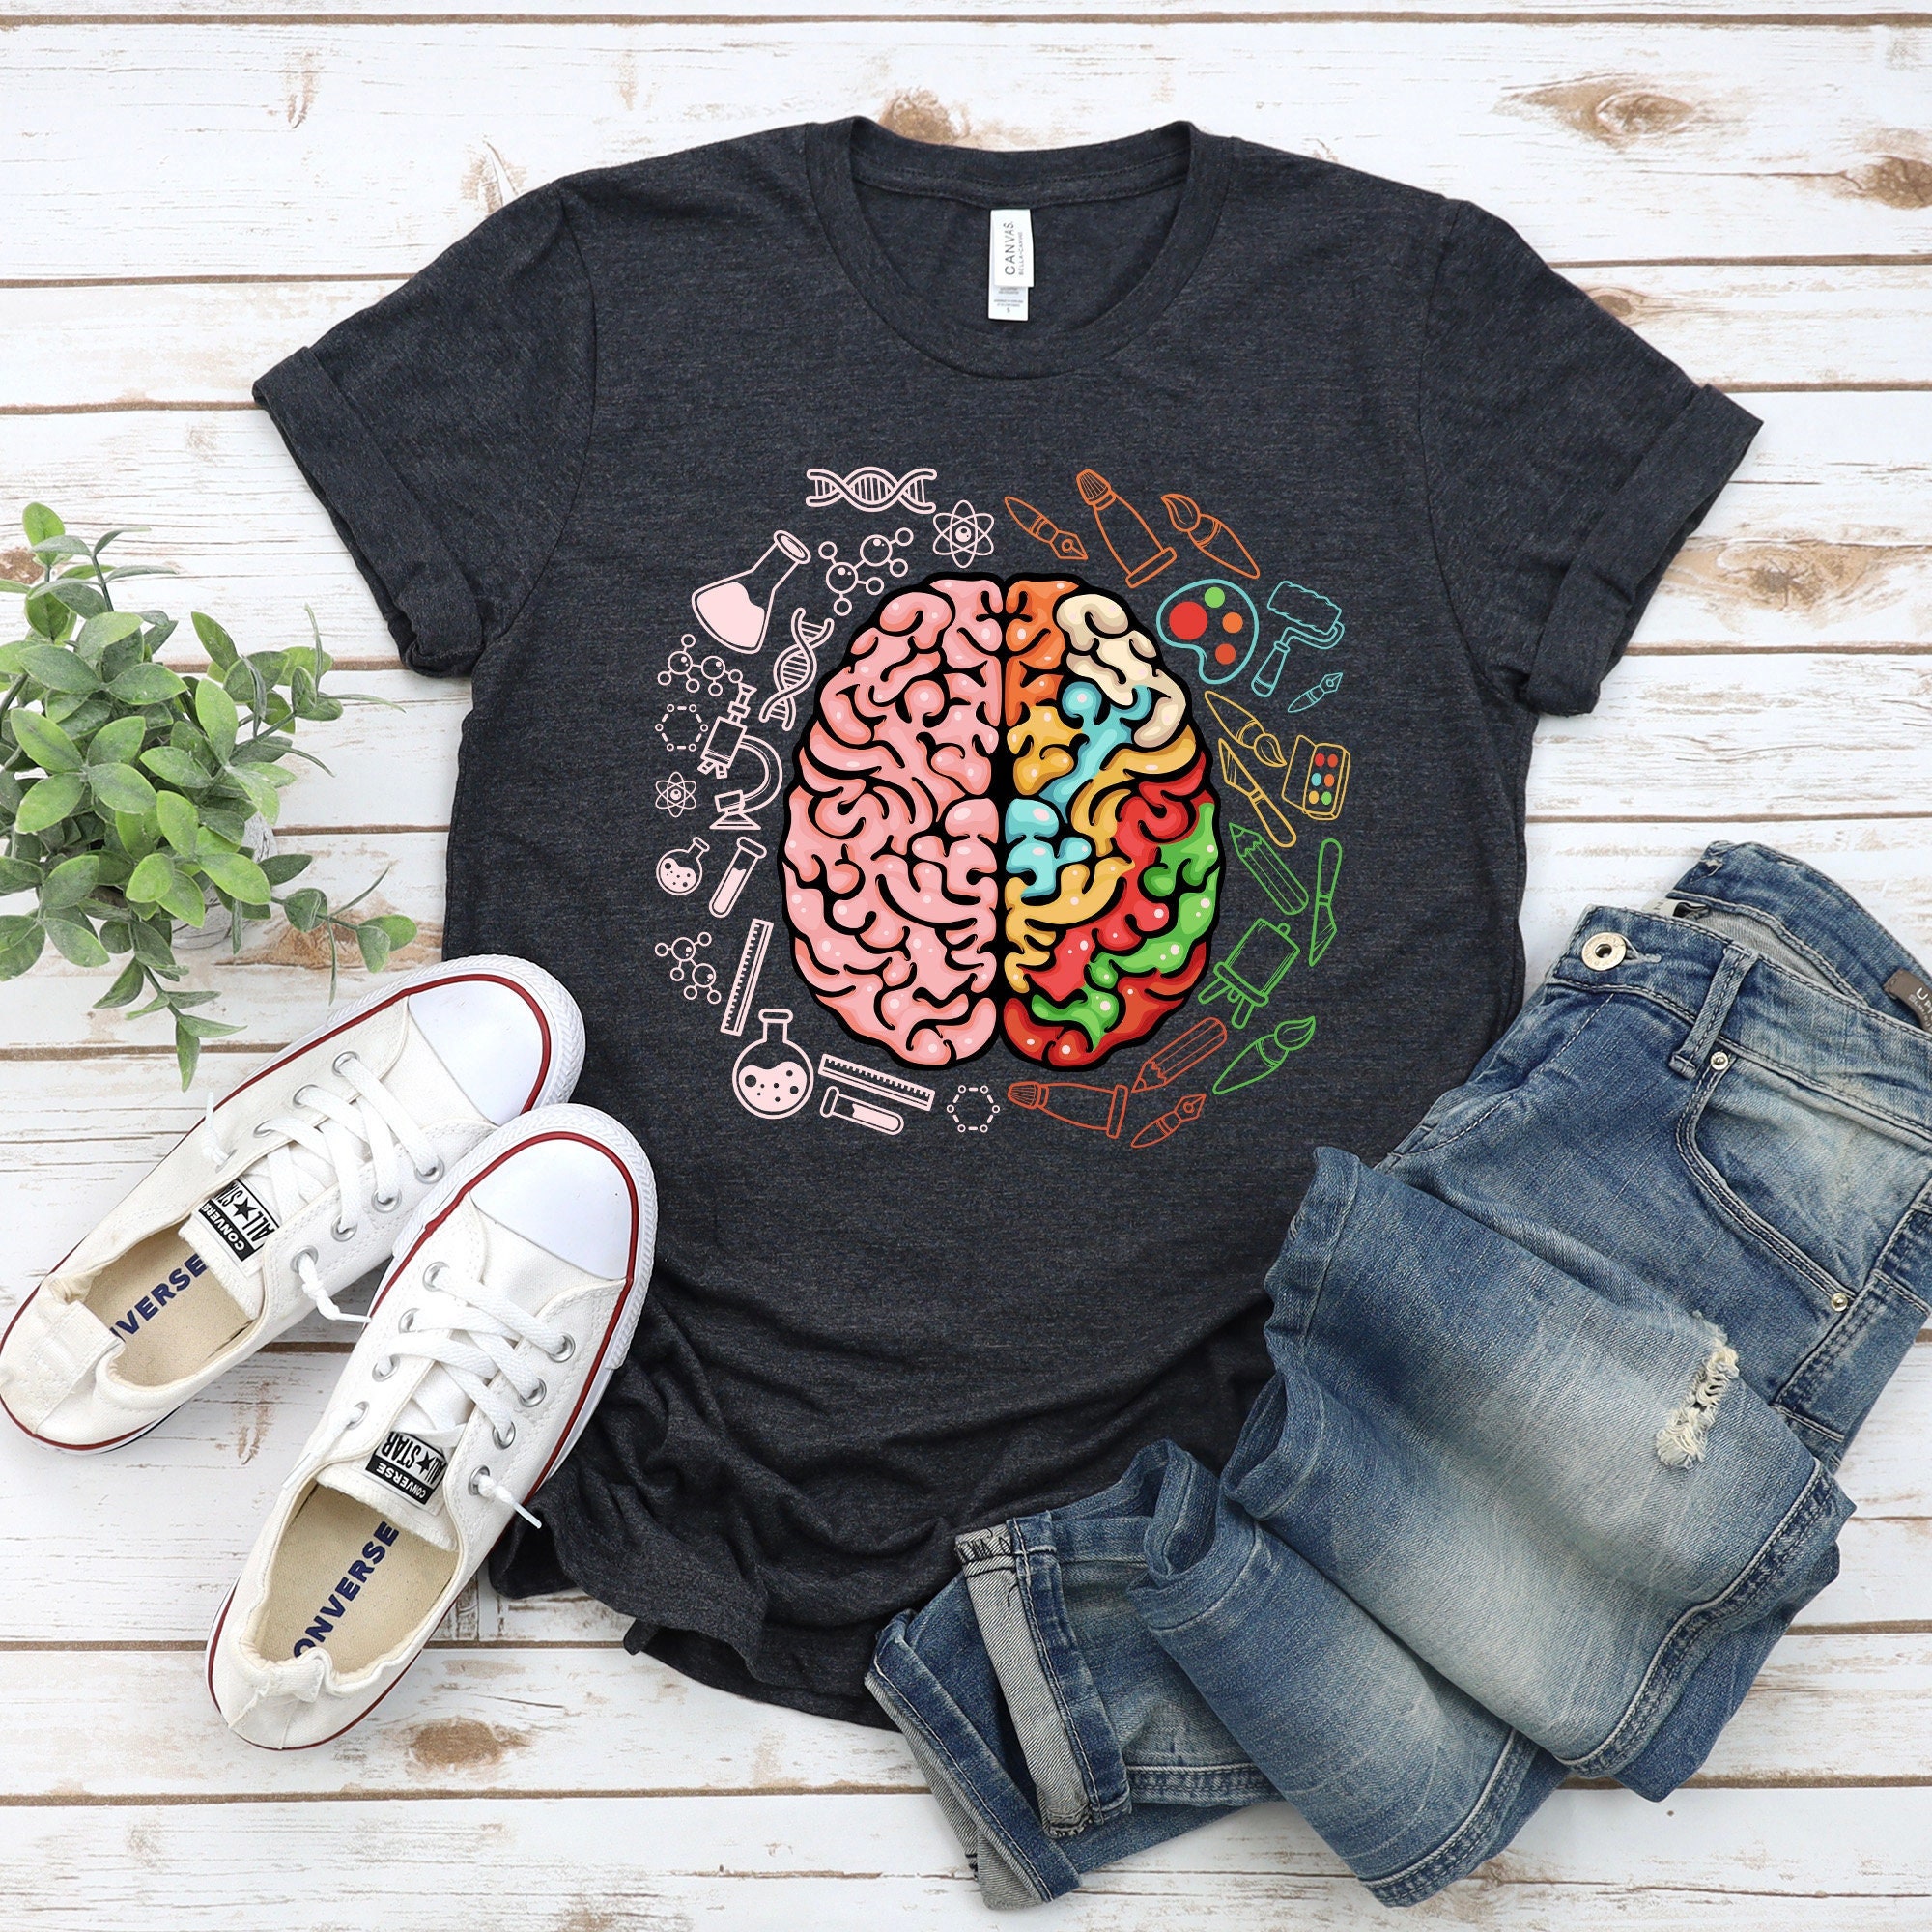 Neurologists Love Brains - Skeleton with Exposed Brain by arts-by-bagwis   Creative t shirt design, Tshirt design inspiration, Shirt design inspiration